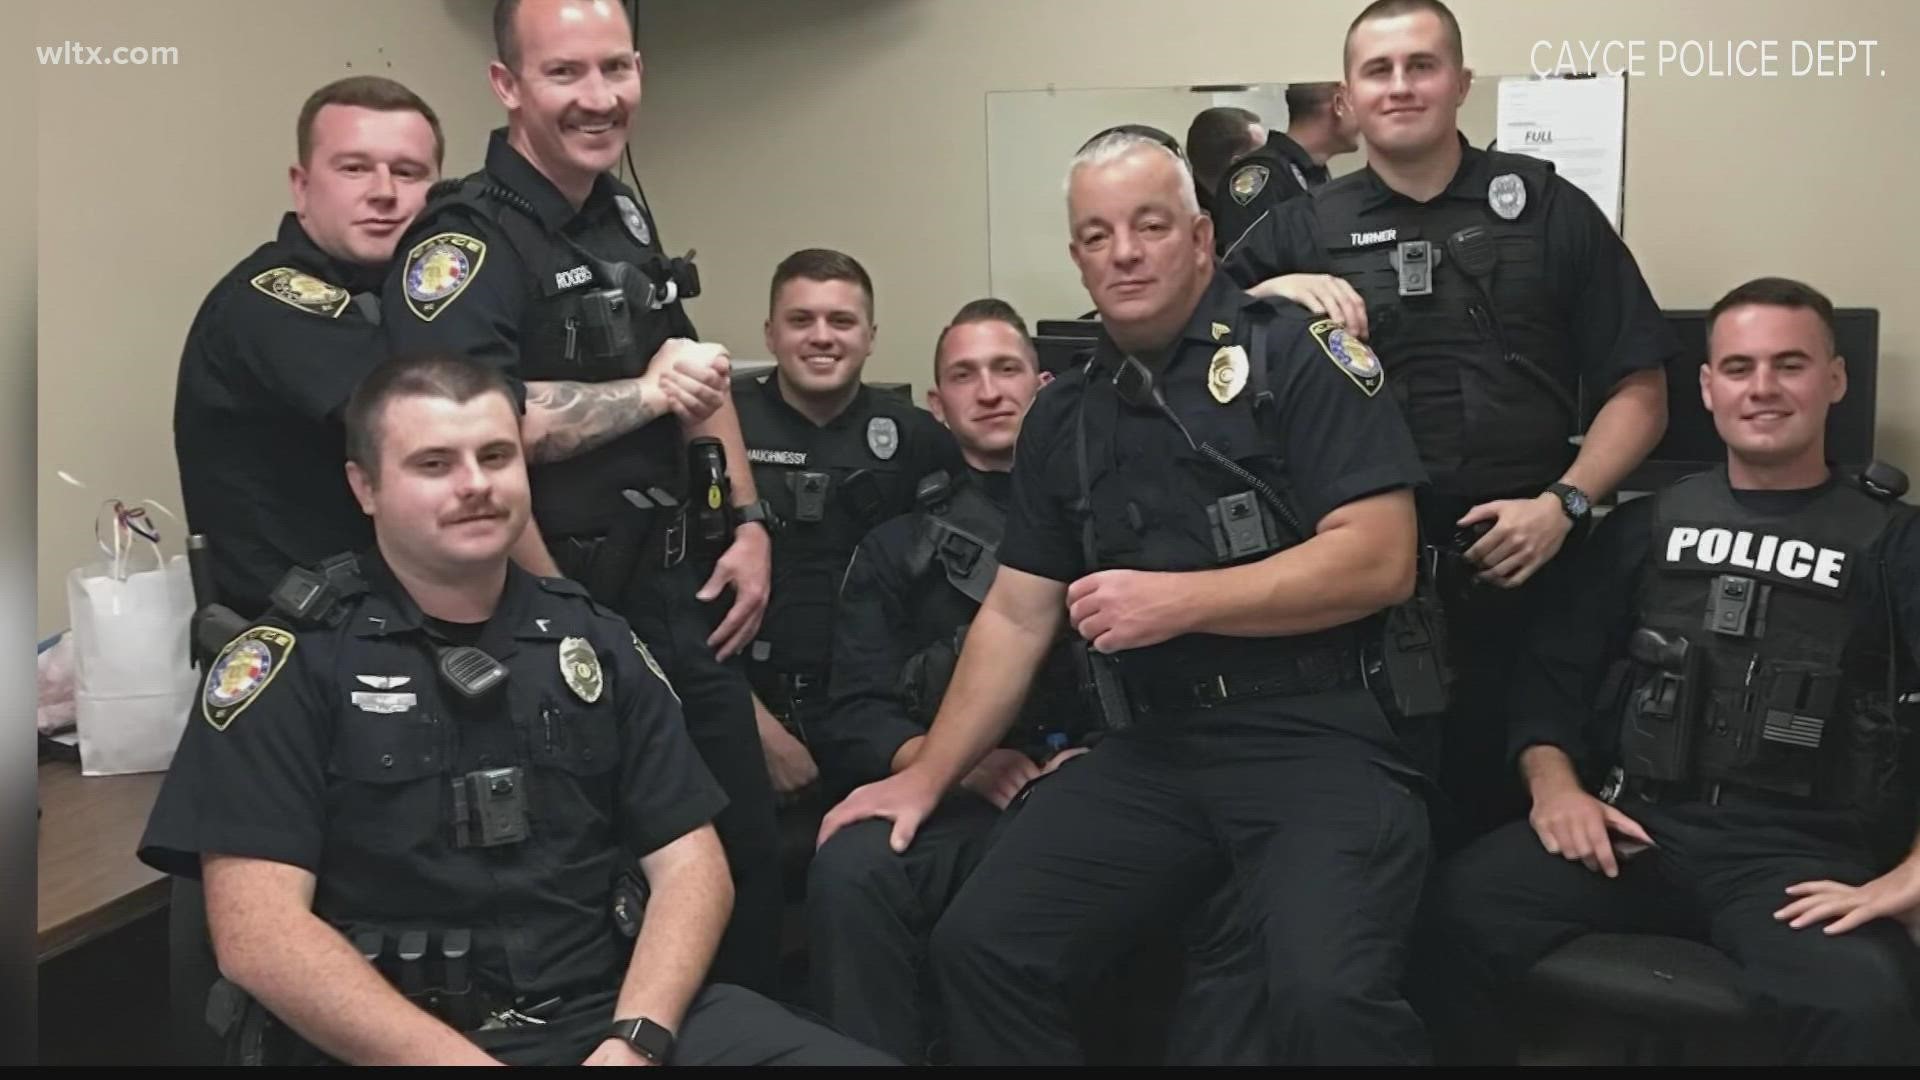 A small South Carolina town of over 5,000 people, Batesburg Leesville is feeling the loss of one of its sons, Officer Drew Barr.